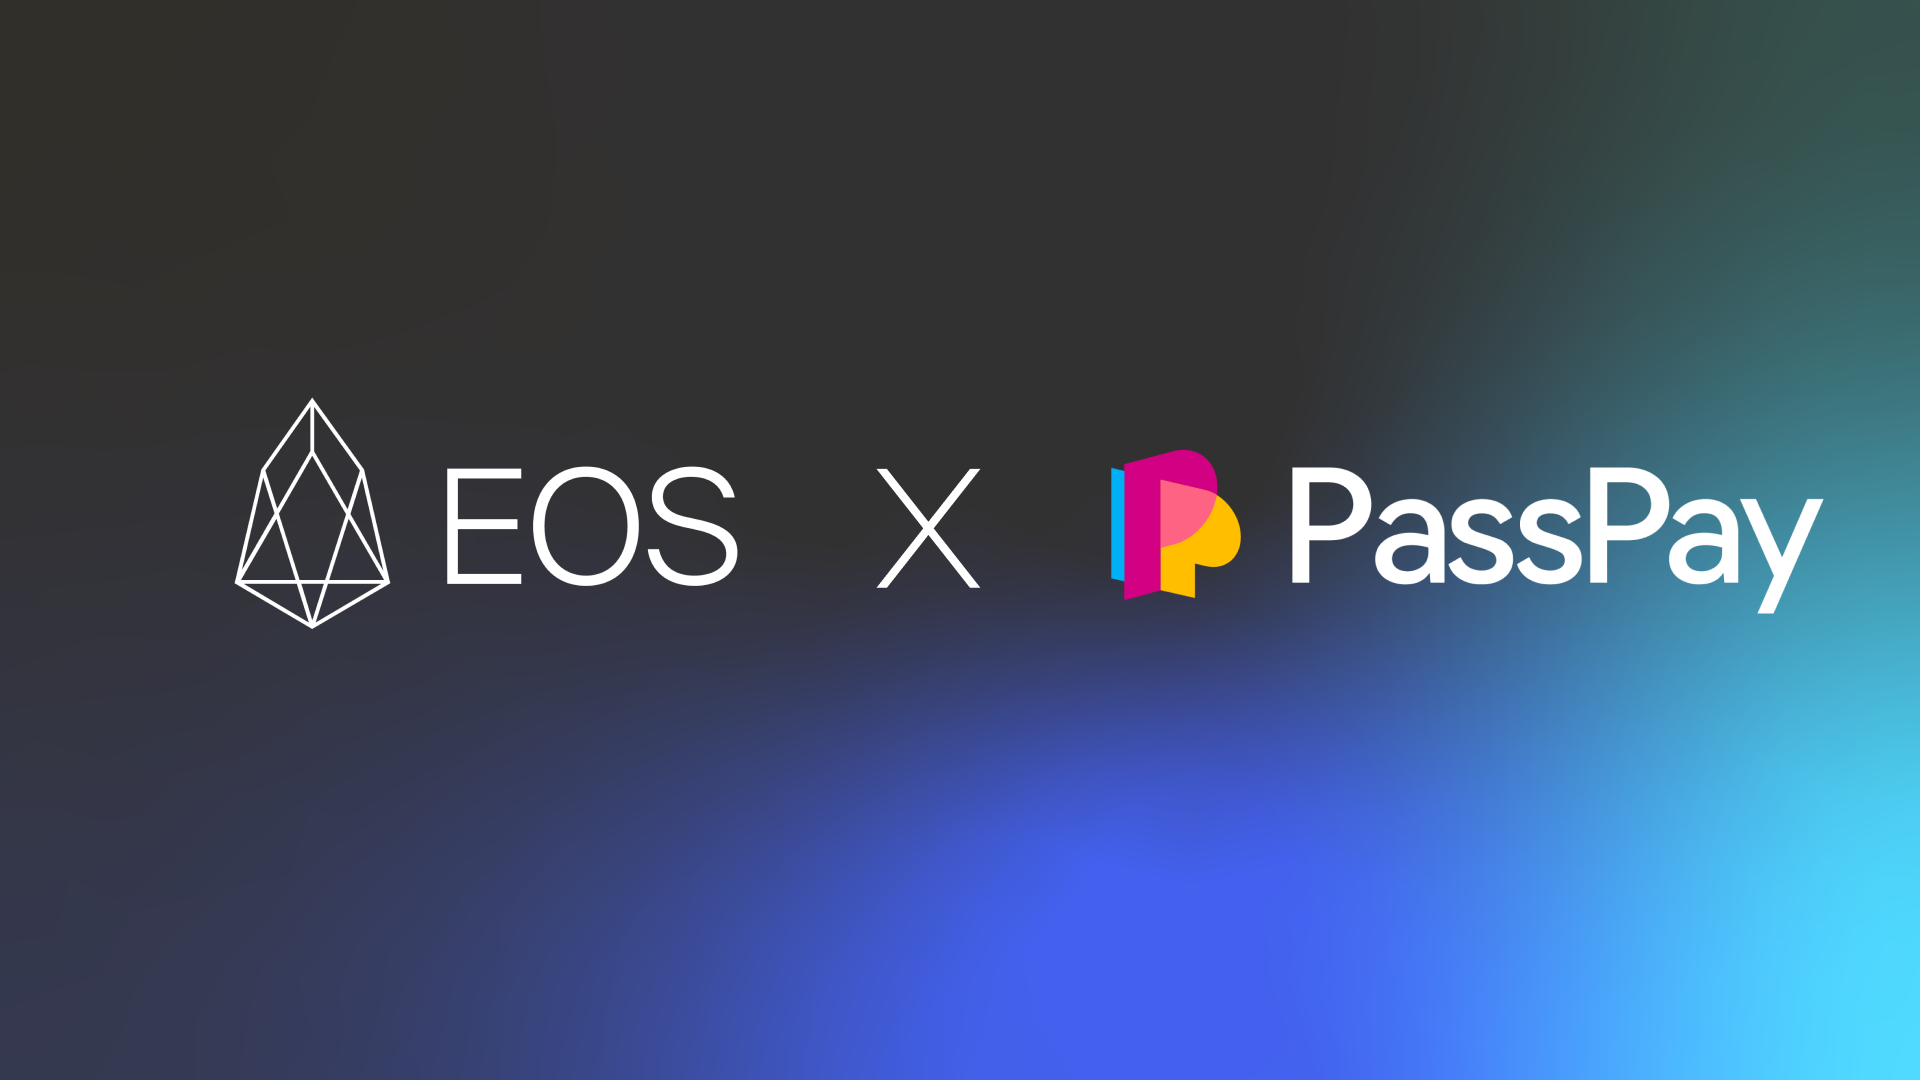 PassPay Co., Ltd. Announces Alliance with EOS Network Foundation and EOS Labs